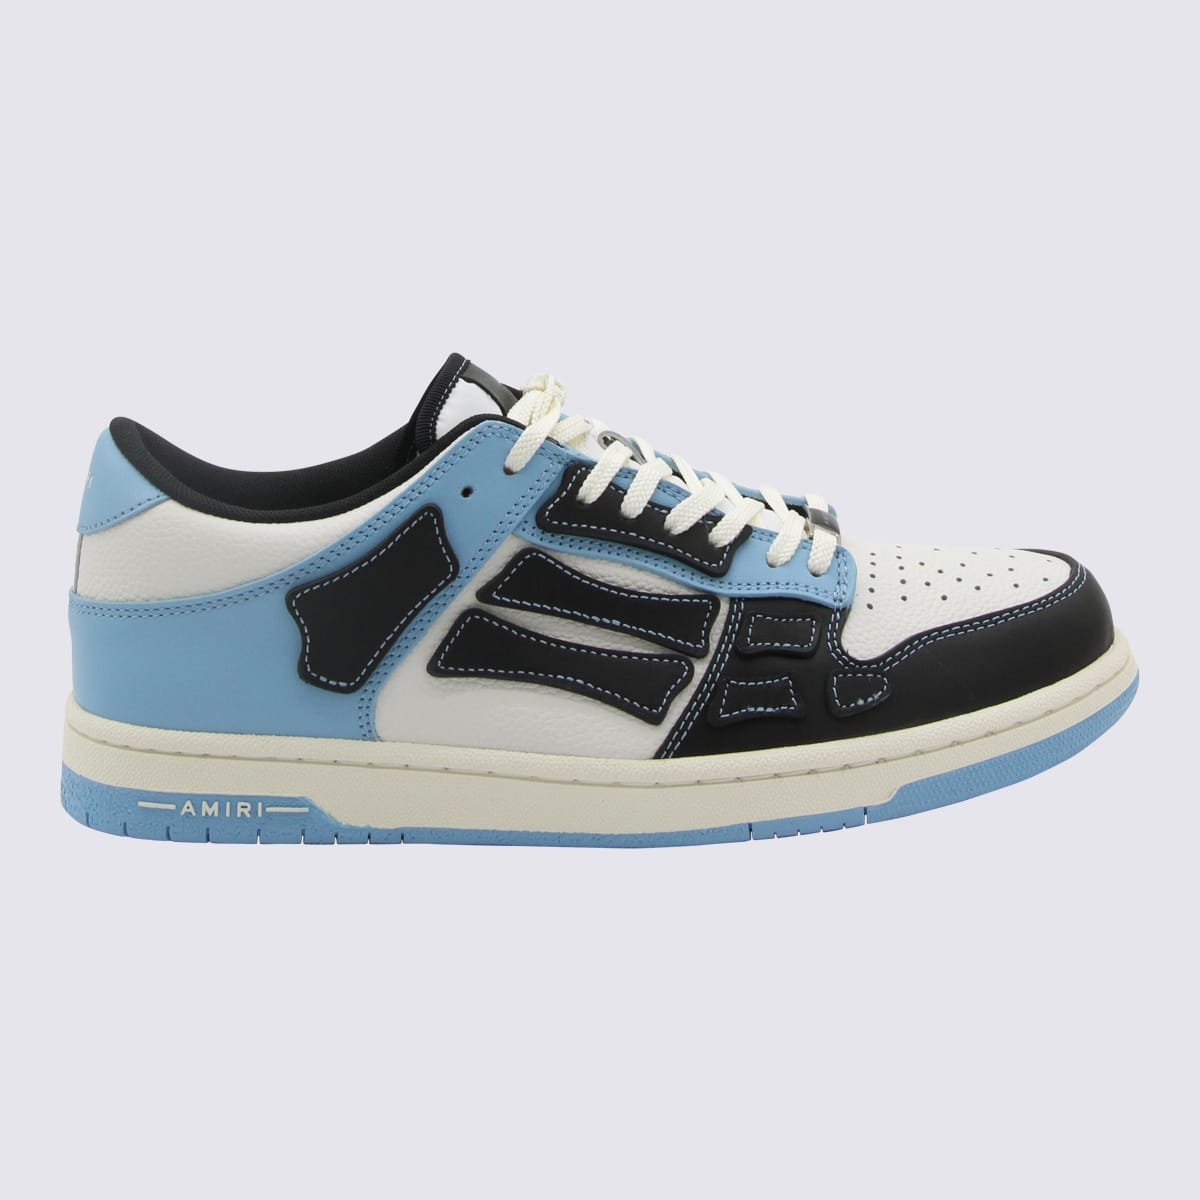 Black, White And Light Blue Leather Sneakers